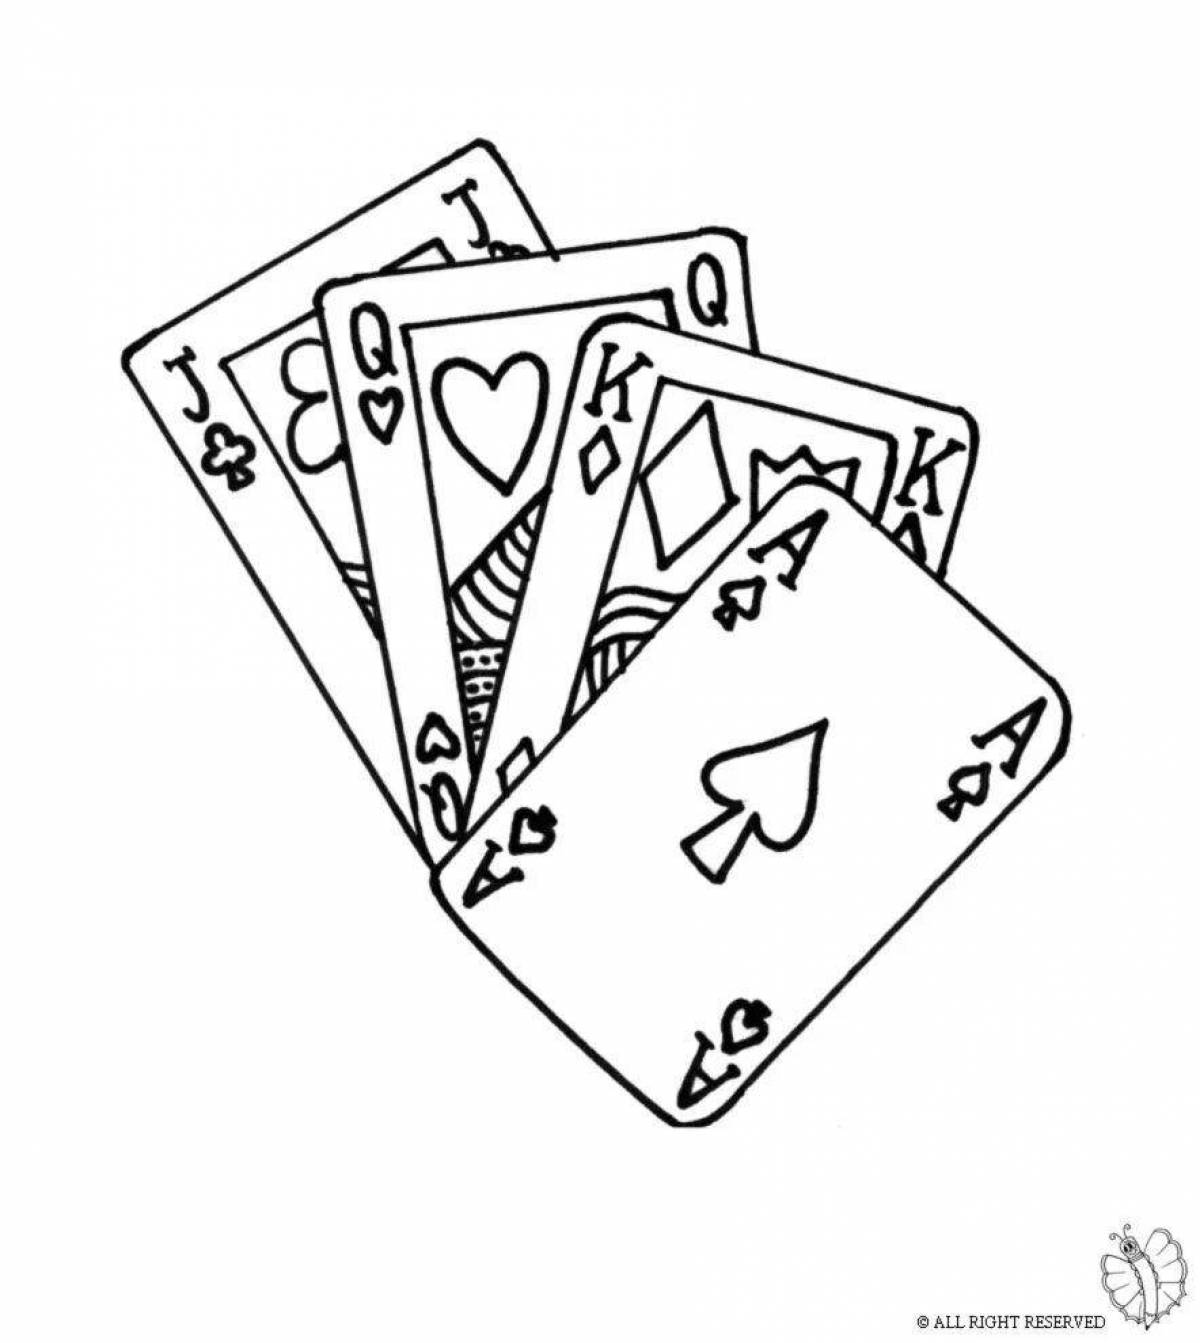 Playing cards #8